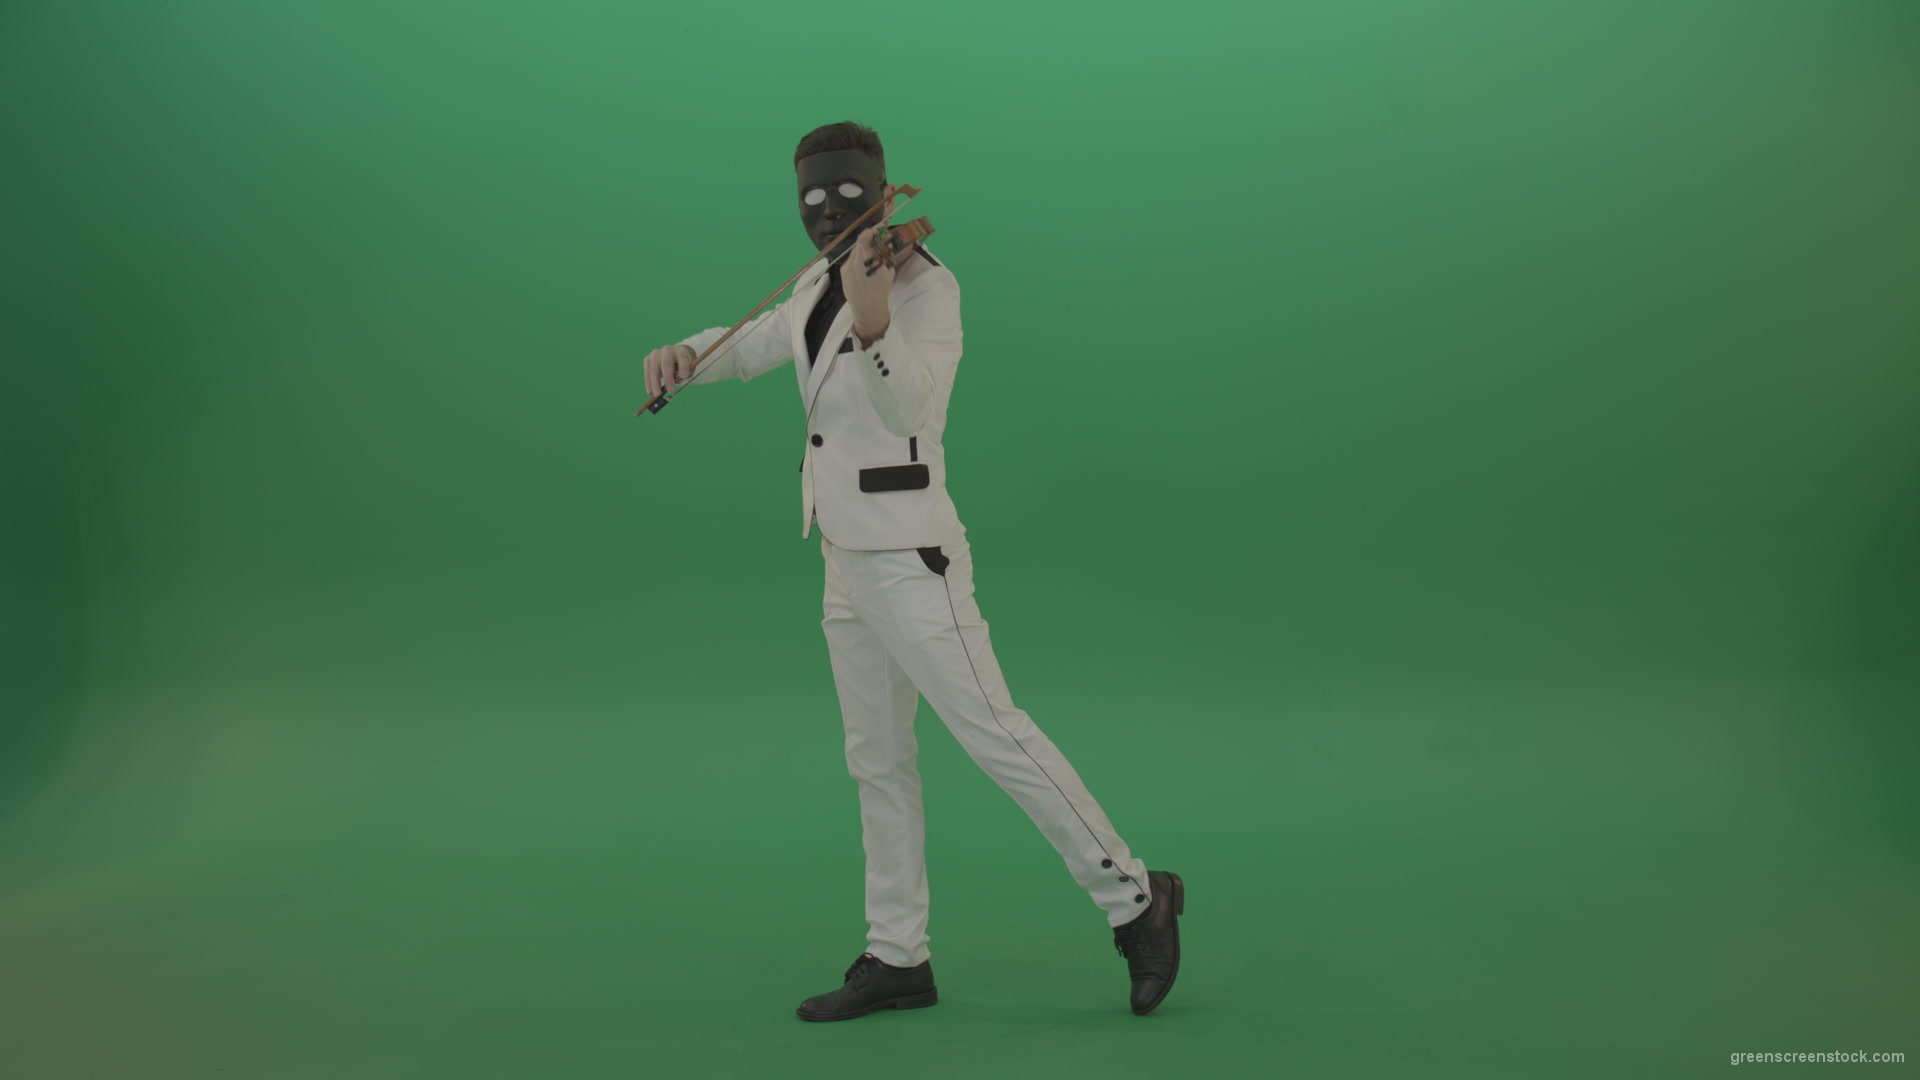 Violinist-in-a-white-jacket-and-in-a-black-mask-with-white-eyes-plays-melodically-on-the-violin_002 Green Screen Stock